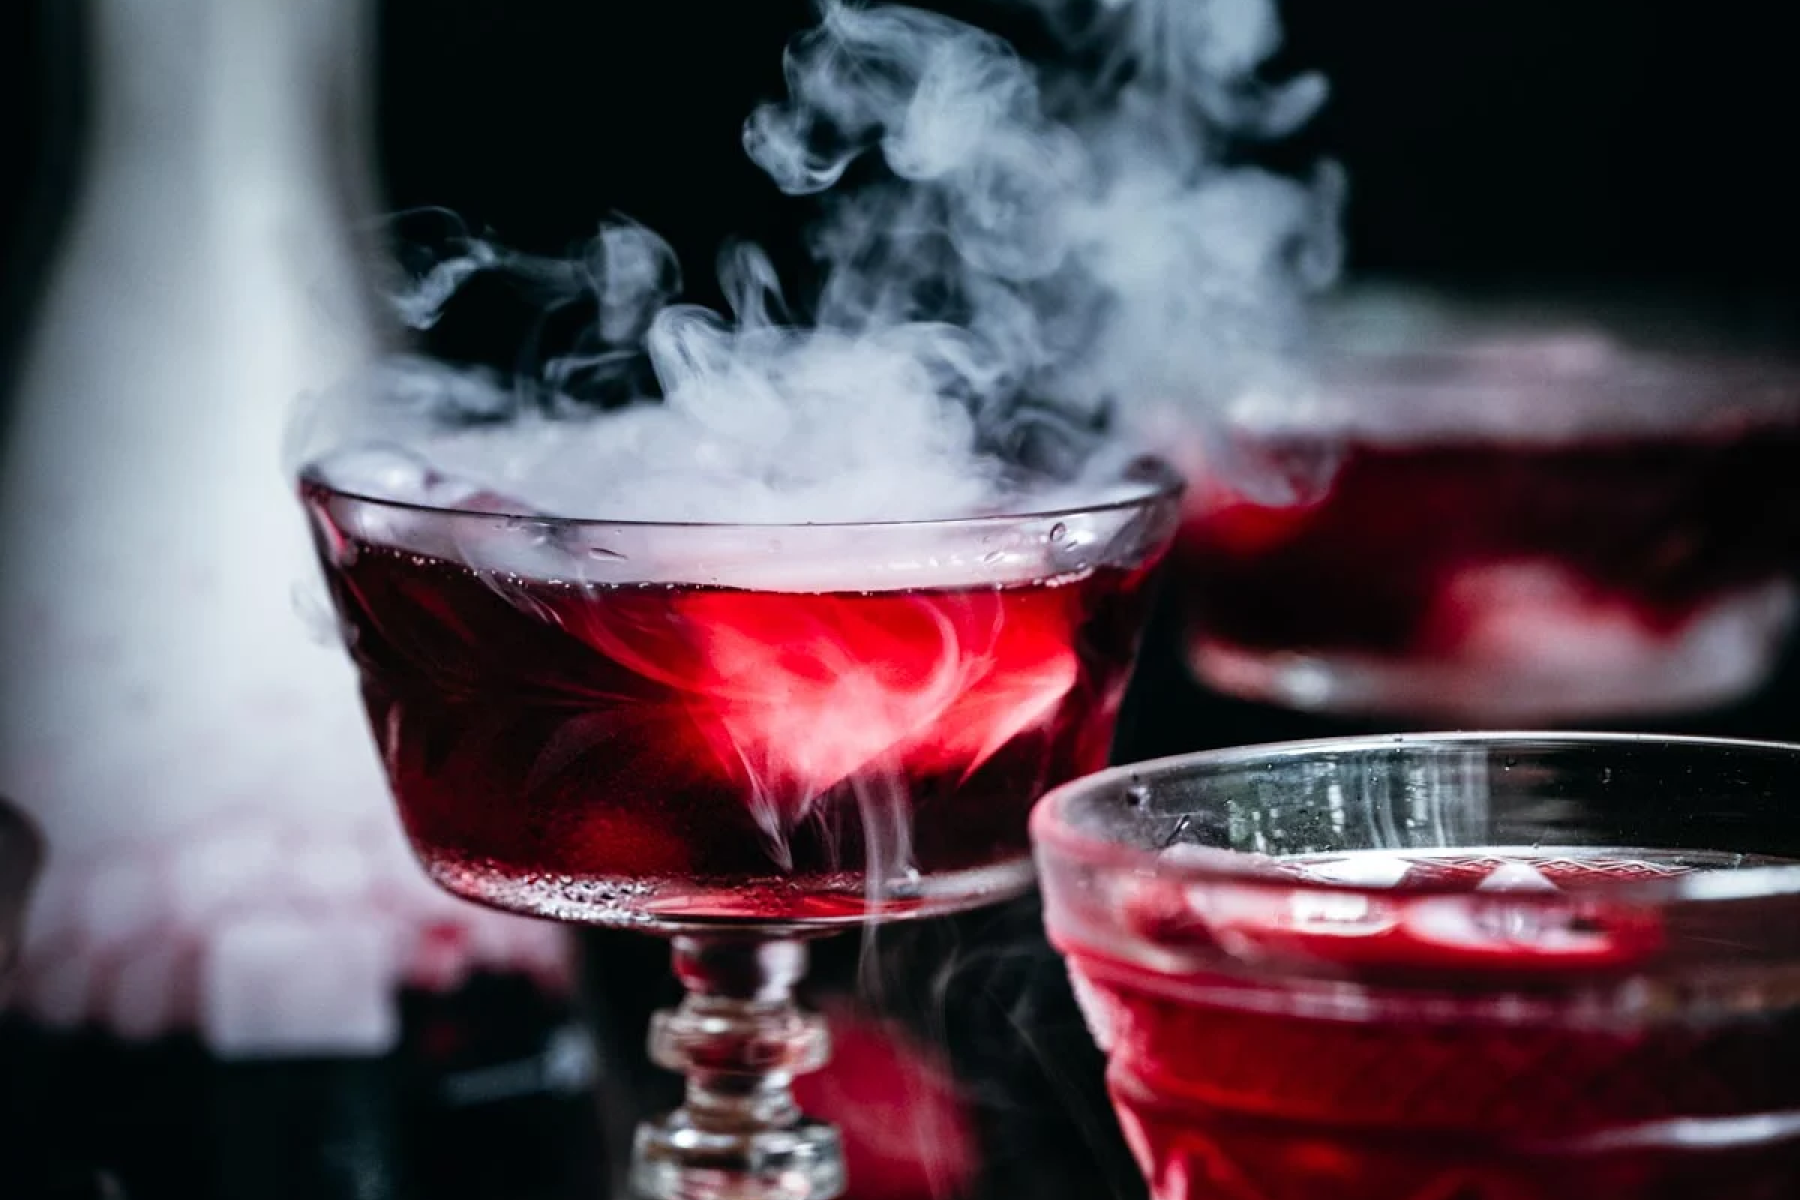 Pay homage to the most well-known classic horror villains with these cocktail recipes